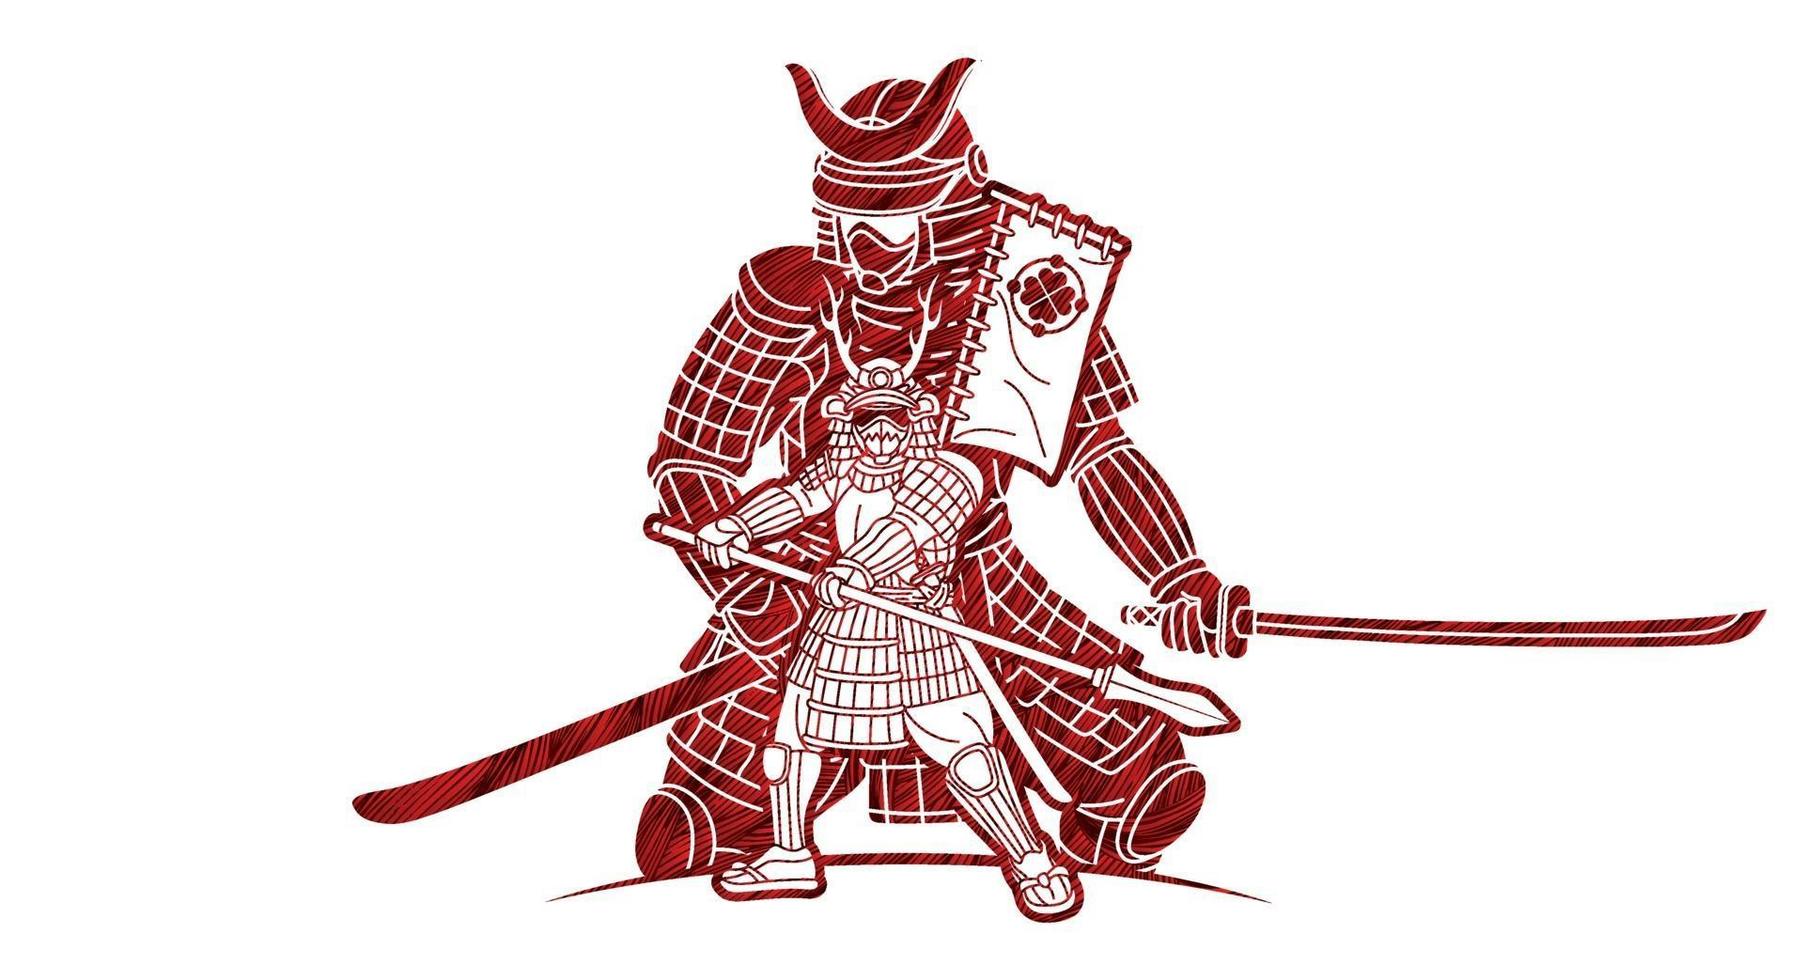 Samurai Warrior Japanese Fighter Ronin with Weapons vector